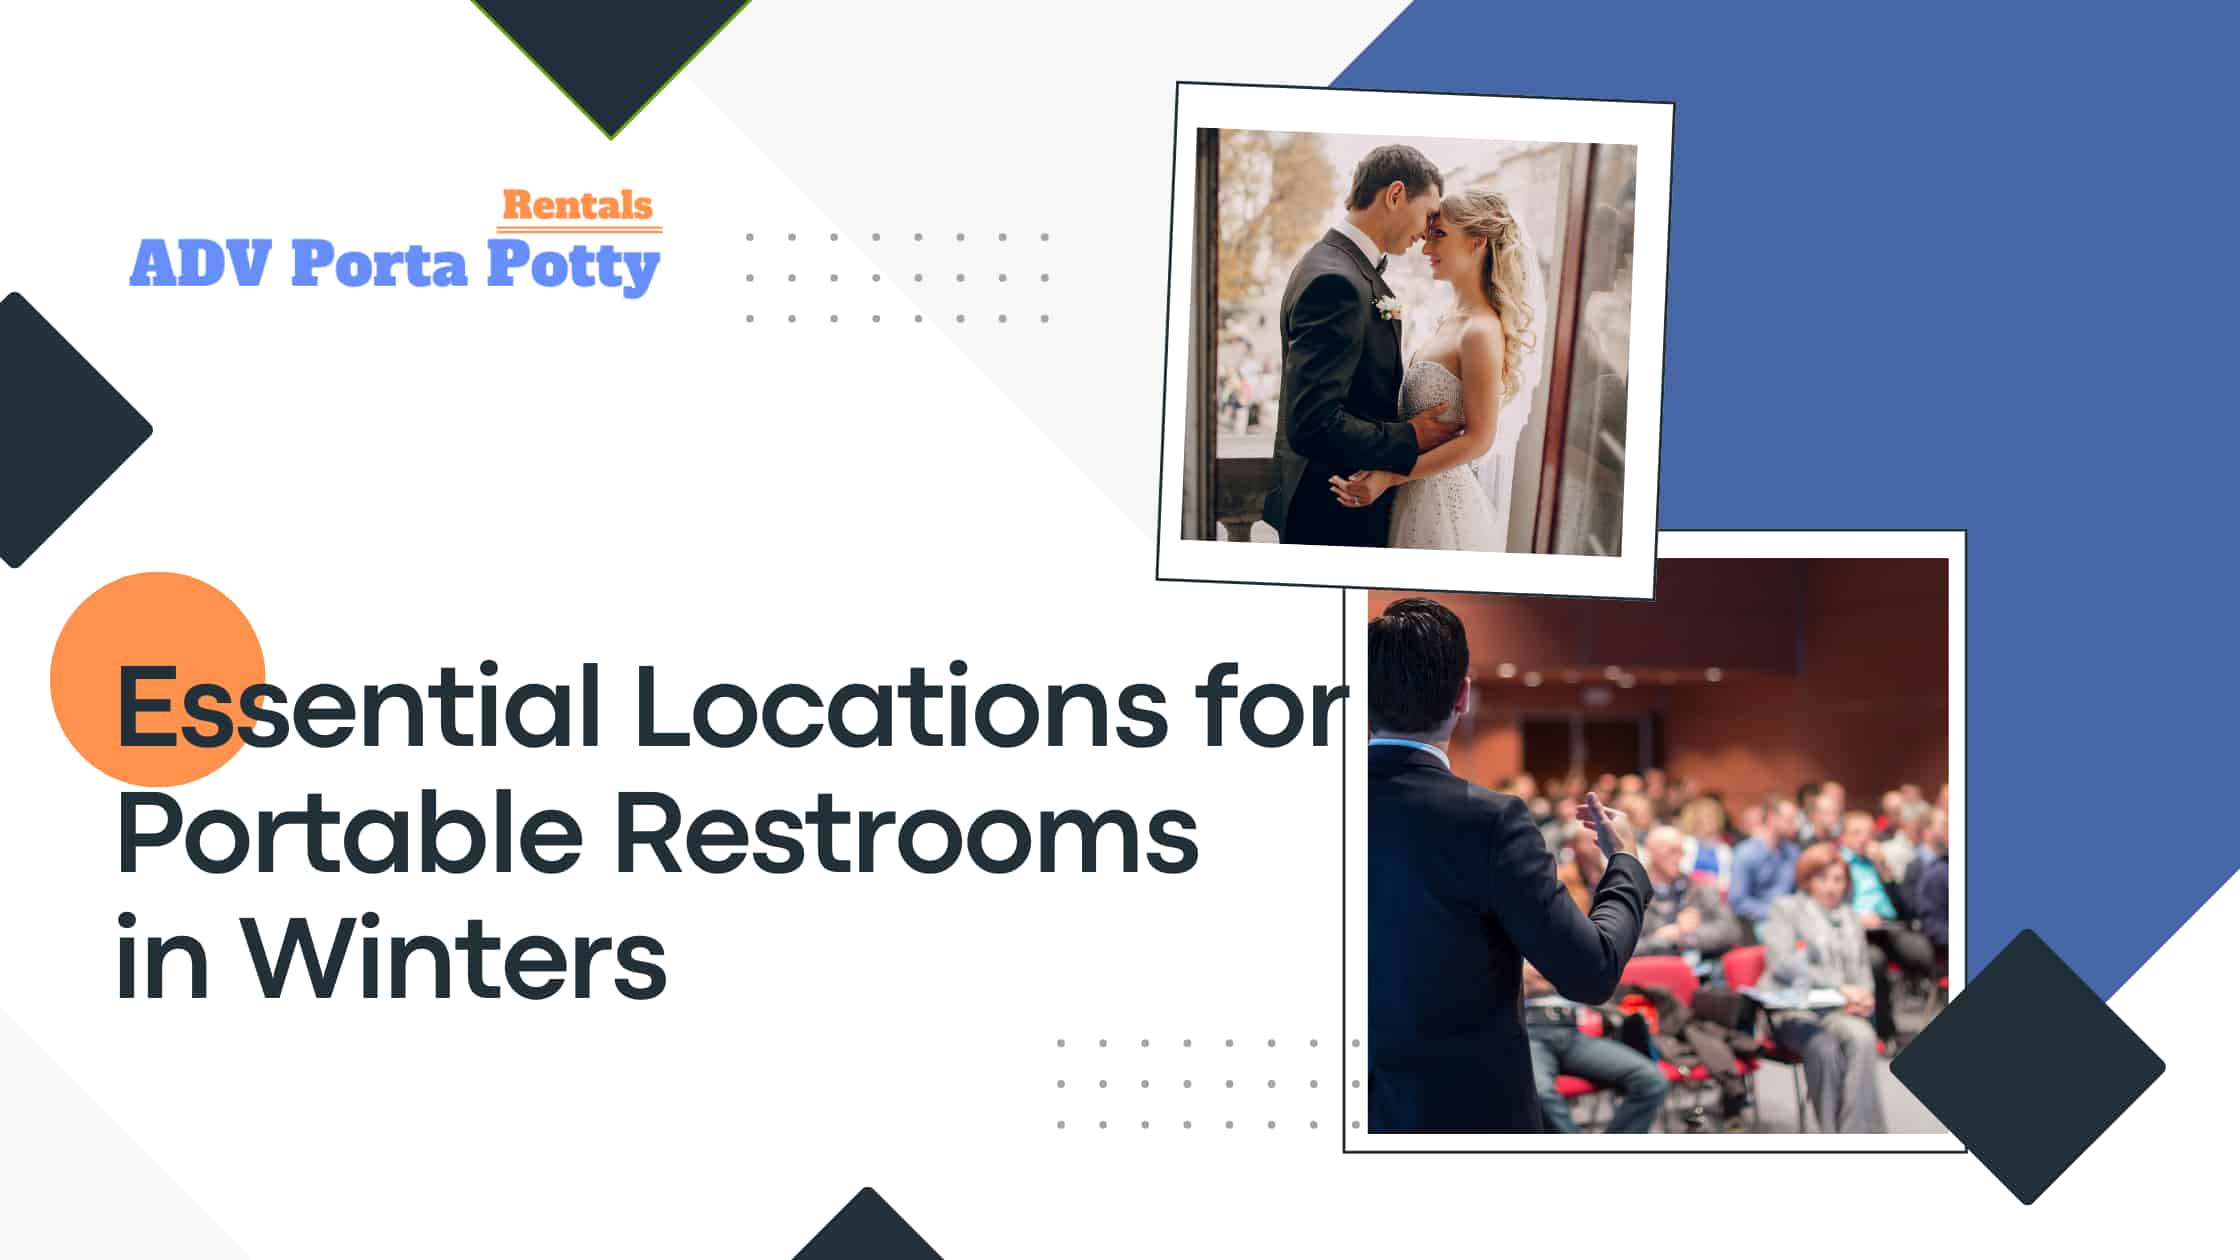 Essential Locations for Portable Restrooms at 3 Winter Events